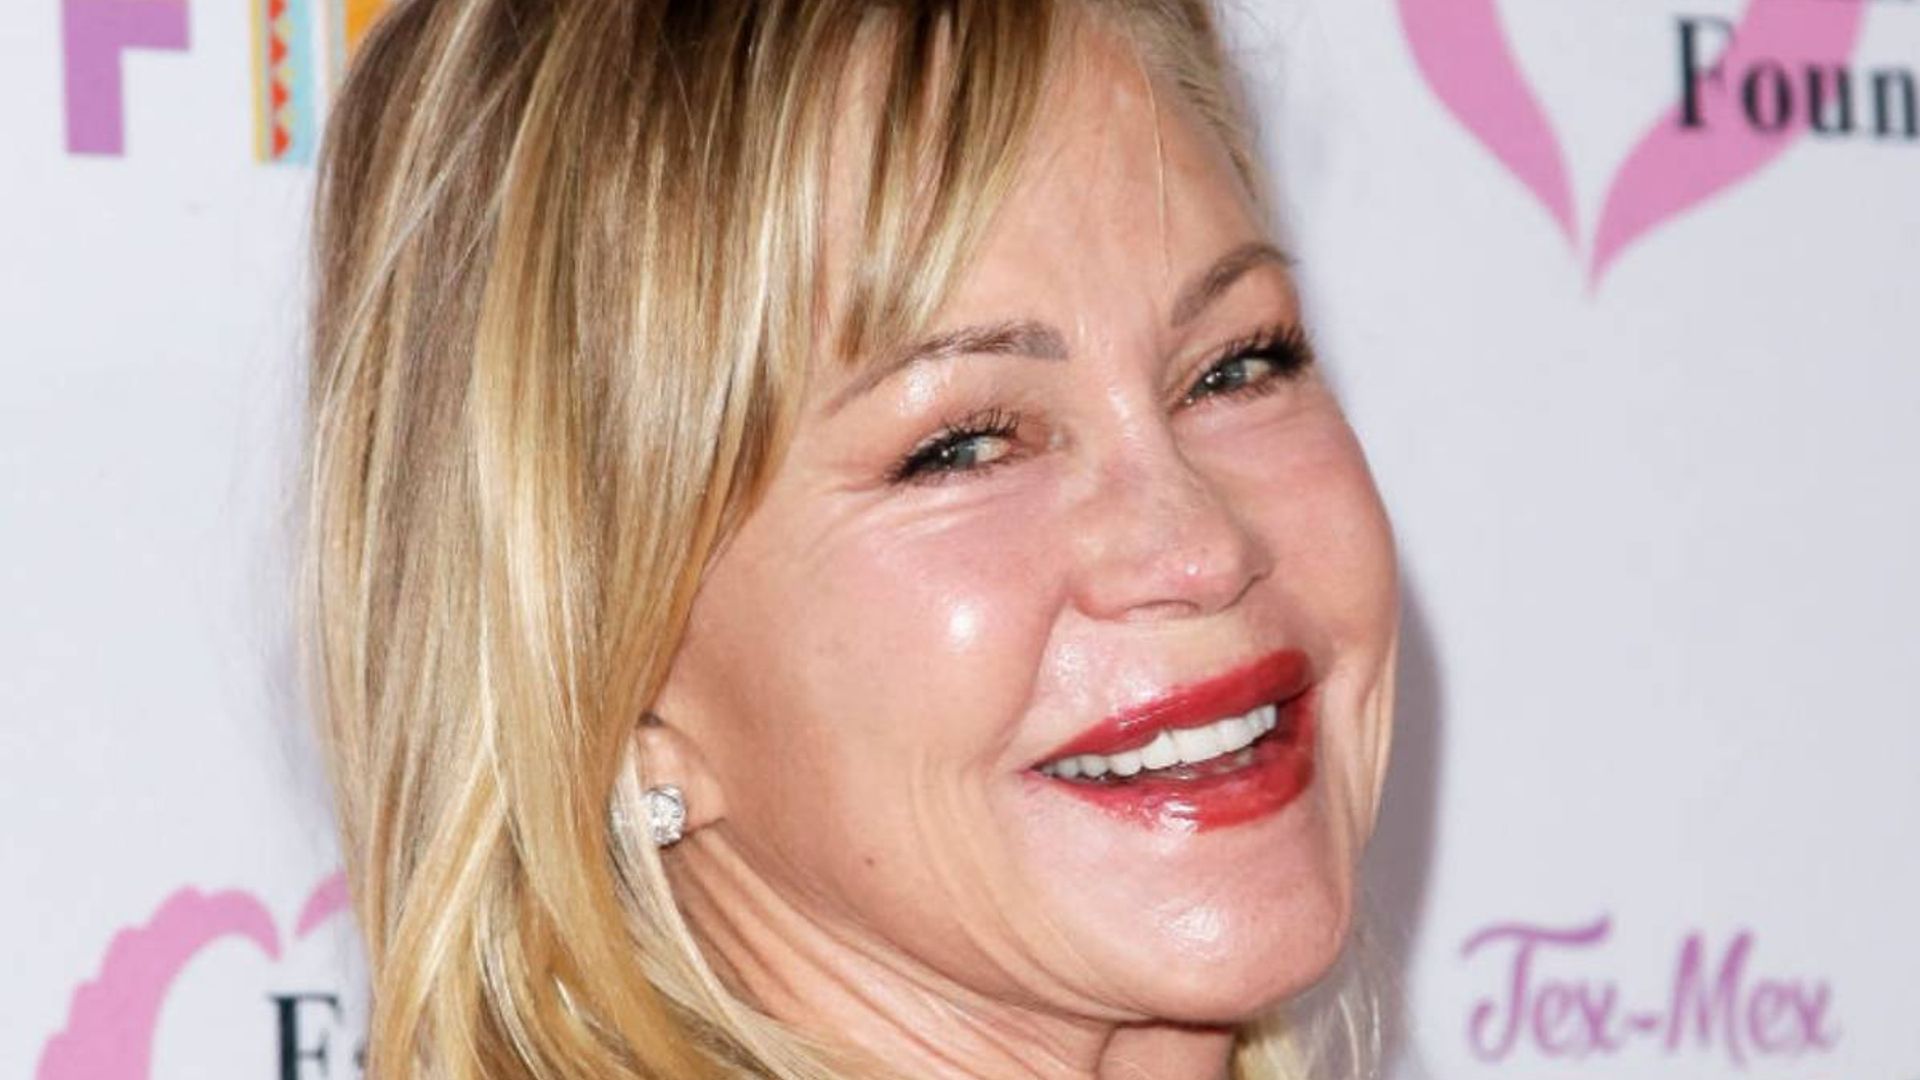 Melanie Griffith, 65, looks unrecognizable after undergoing